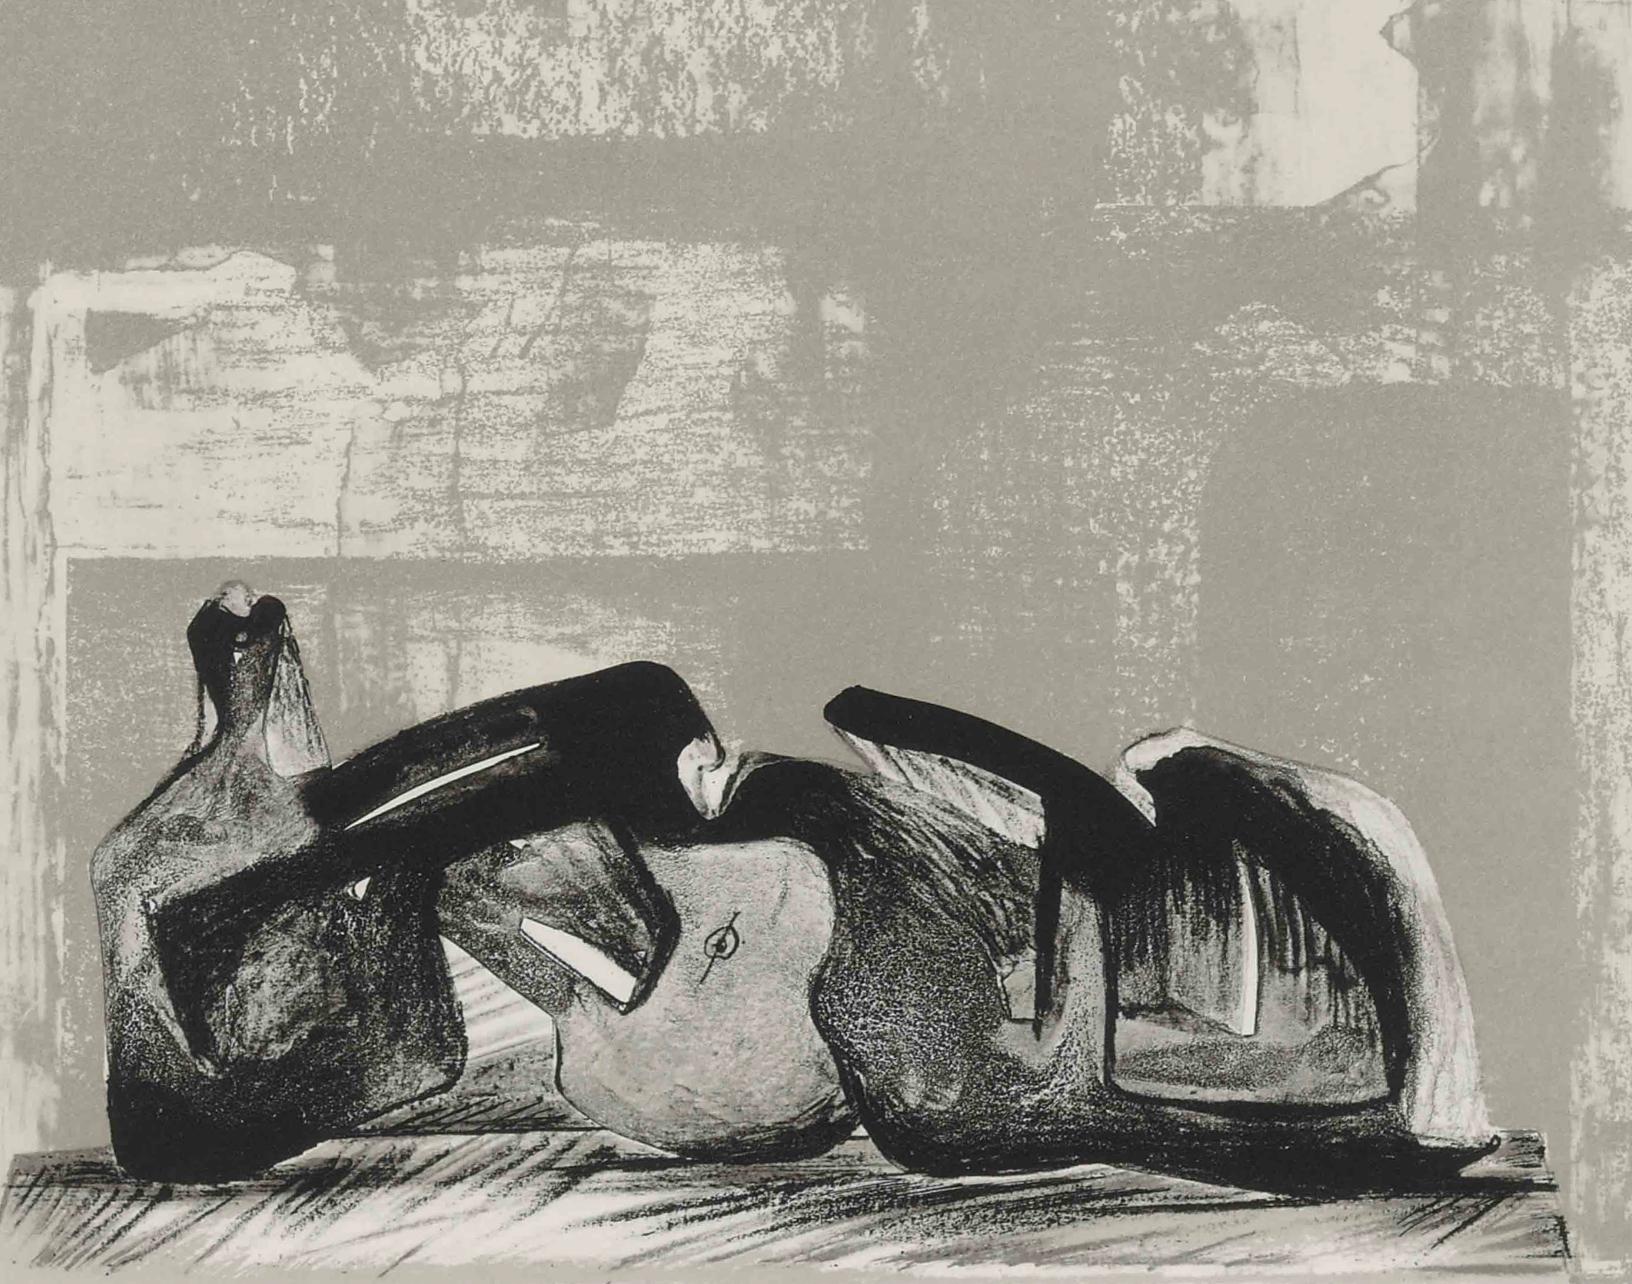 Henry Moore Figurative Print - Moore, Reclining Figure, Interior Setting I (Cramer 458), XXe Siècle (after)